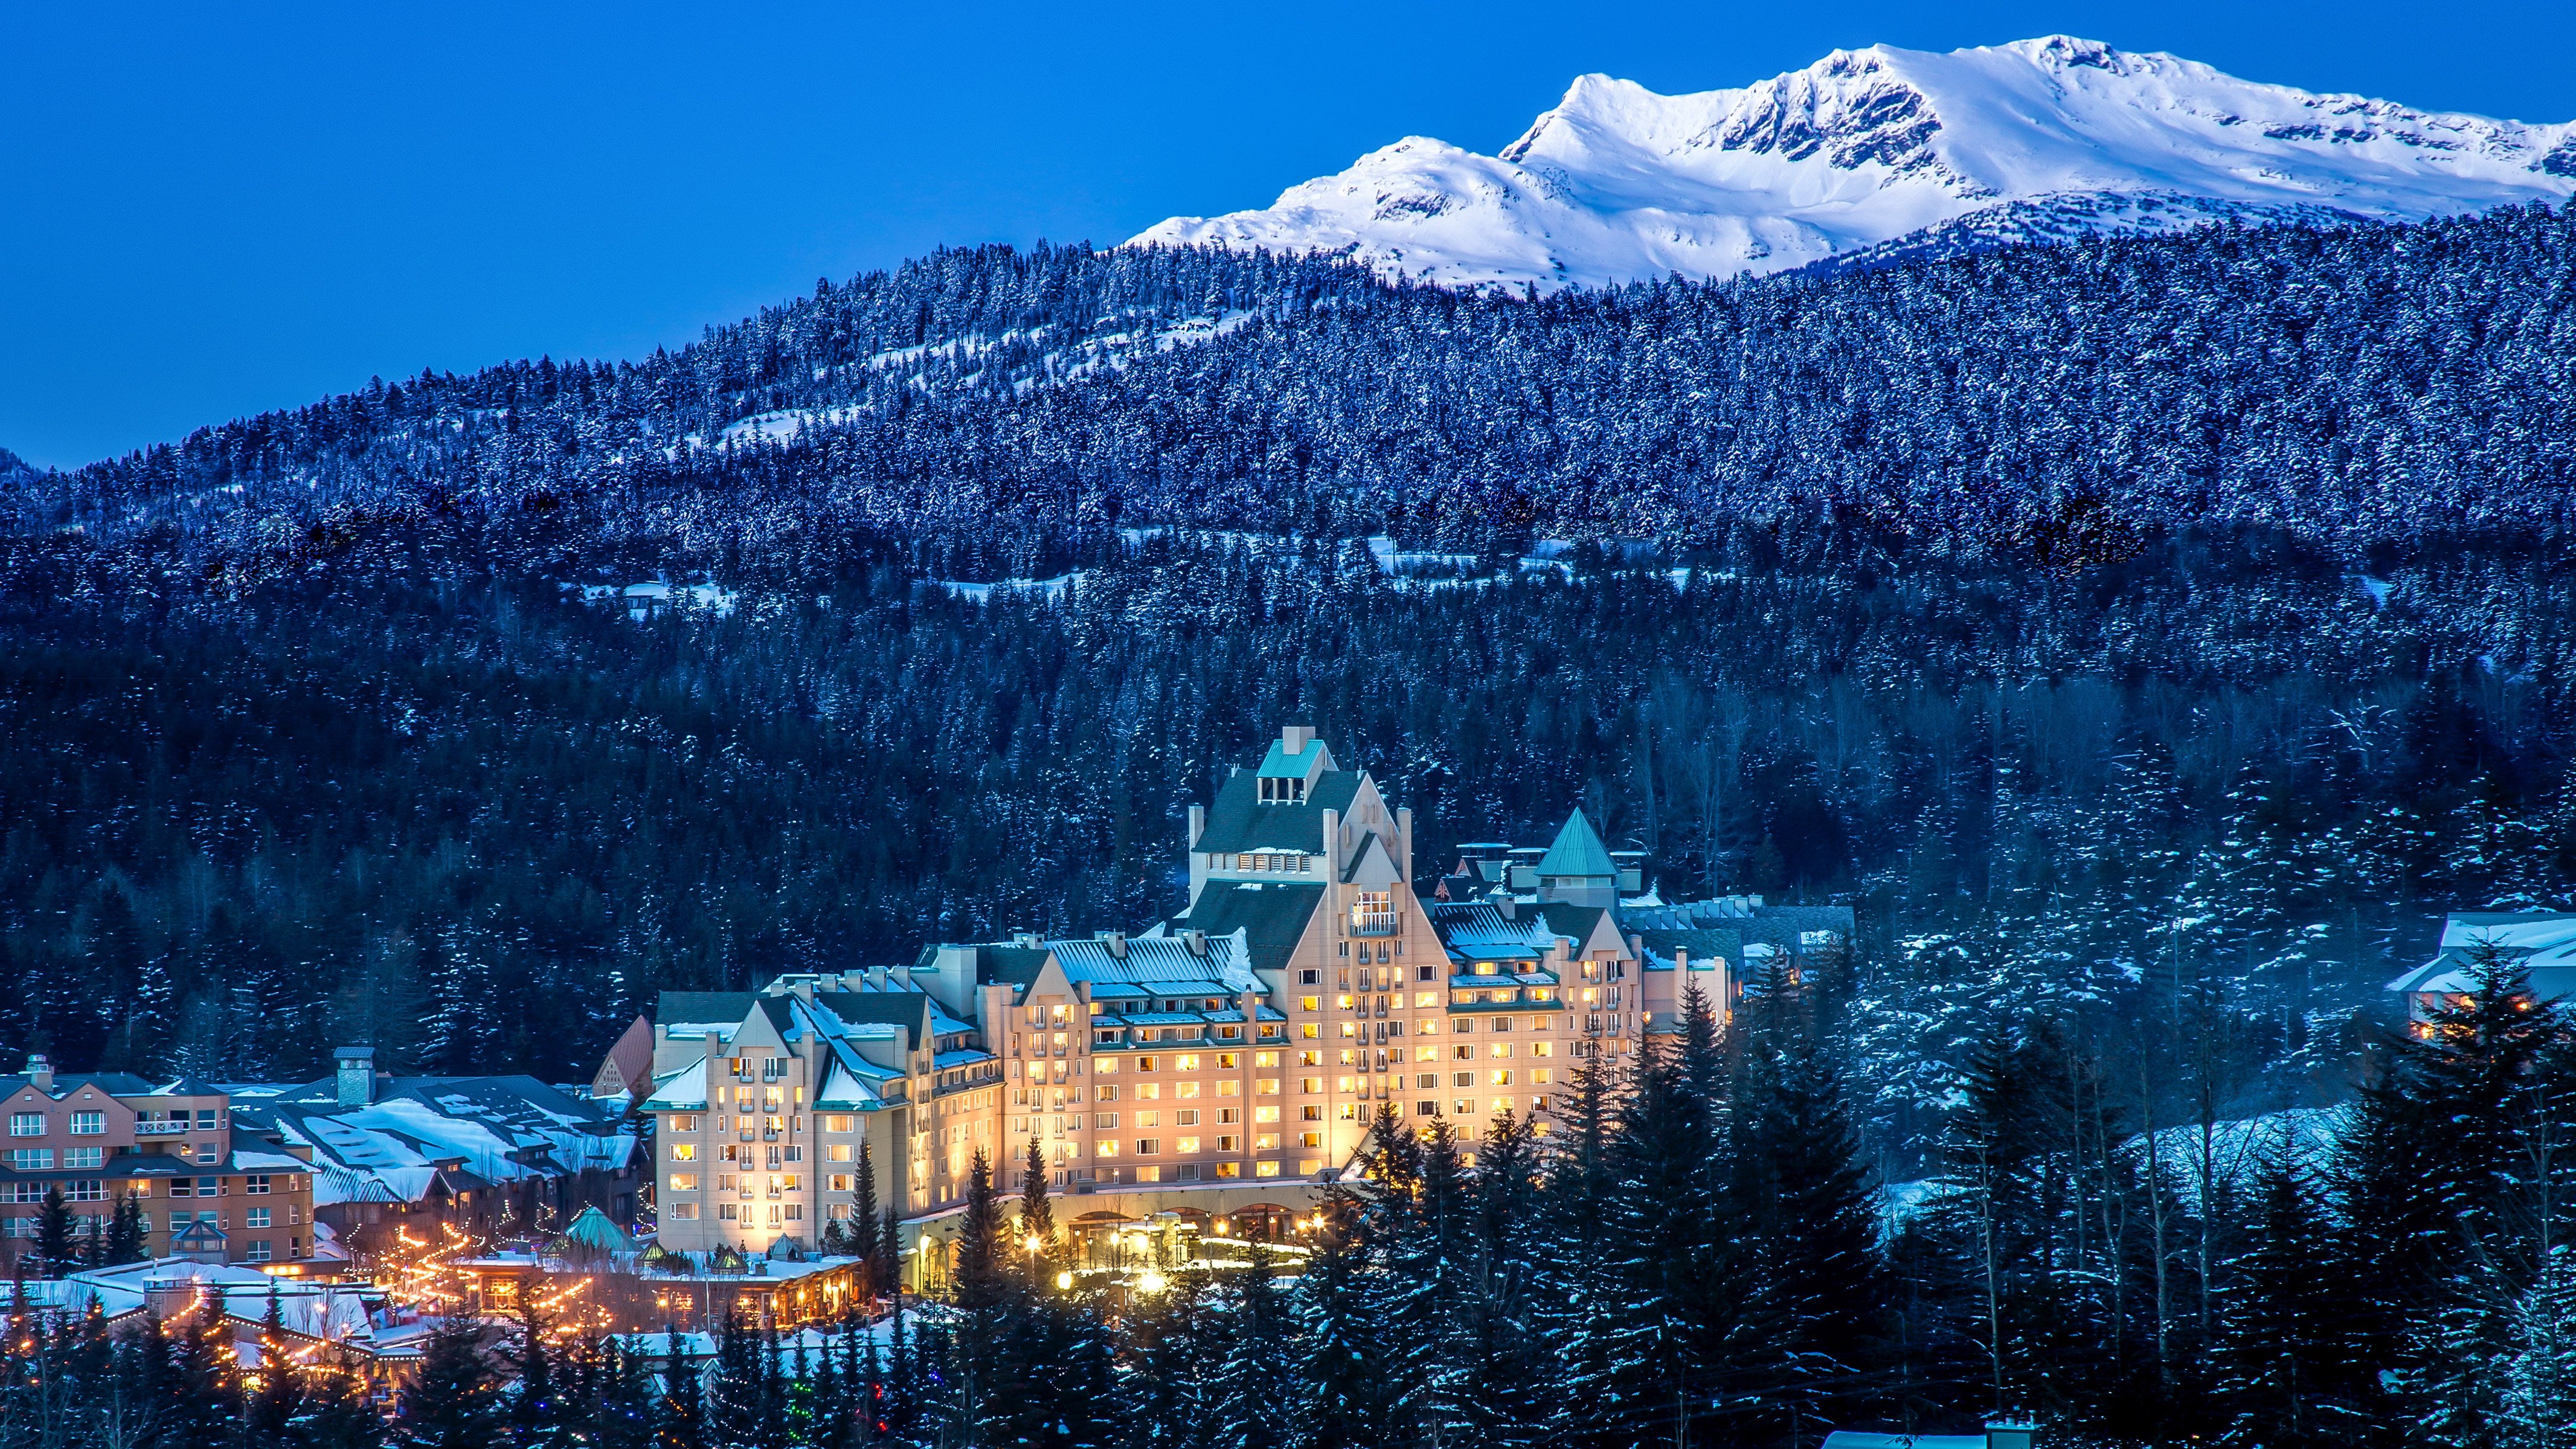 Ski Vacation Package - Save 5-15% at The Fairmont Chateau Whistler! Book by January 31,  2022.